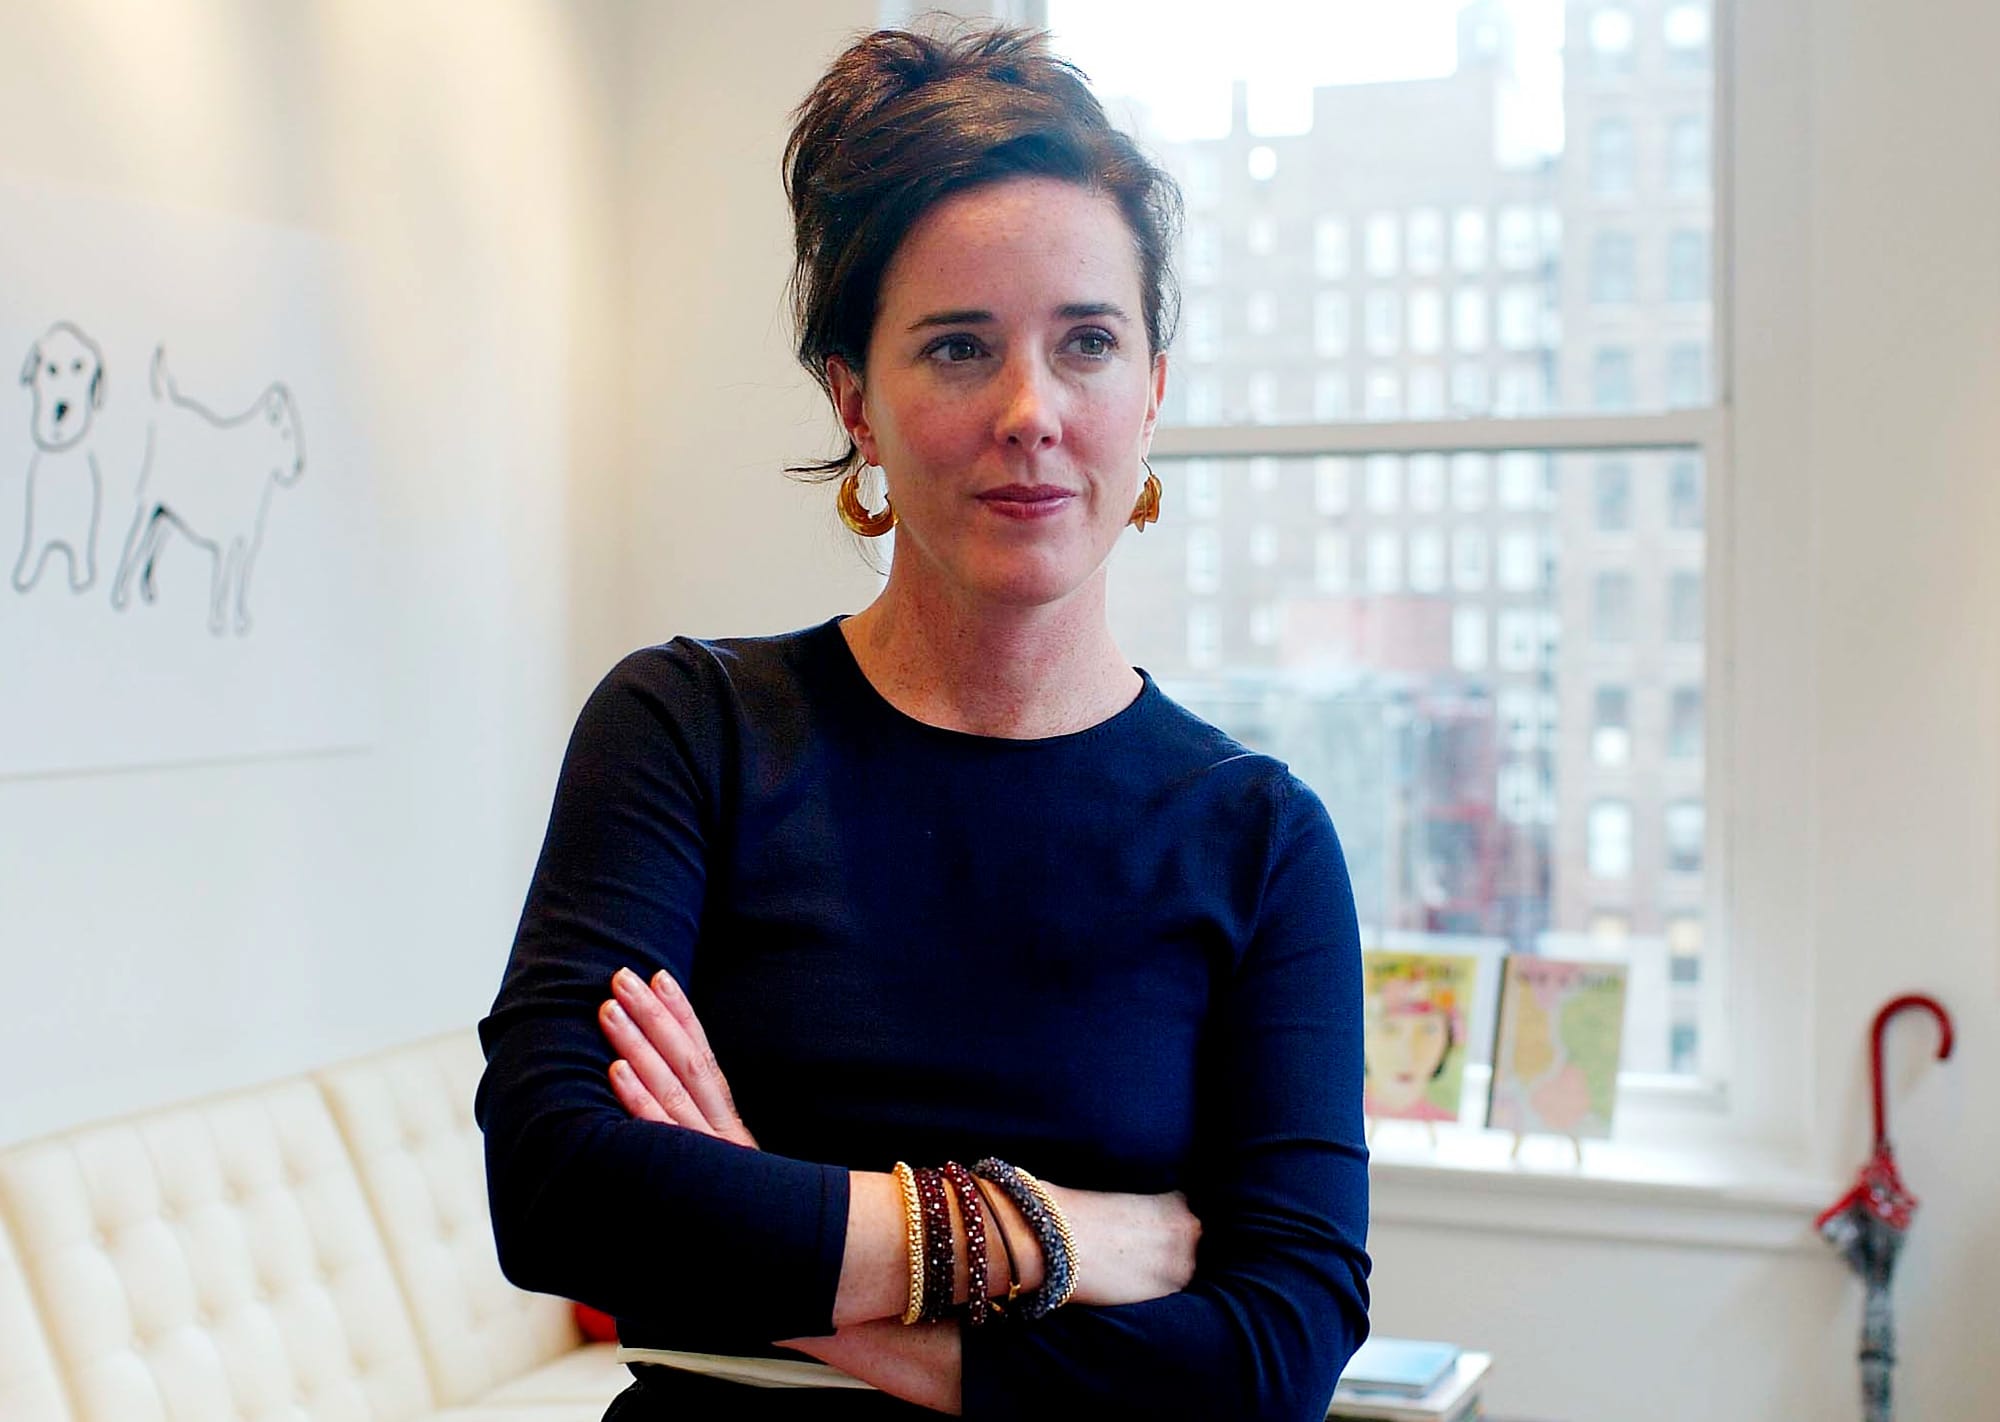 Kate Spade suicide: Gender role in mental illness diagnosis, treatment